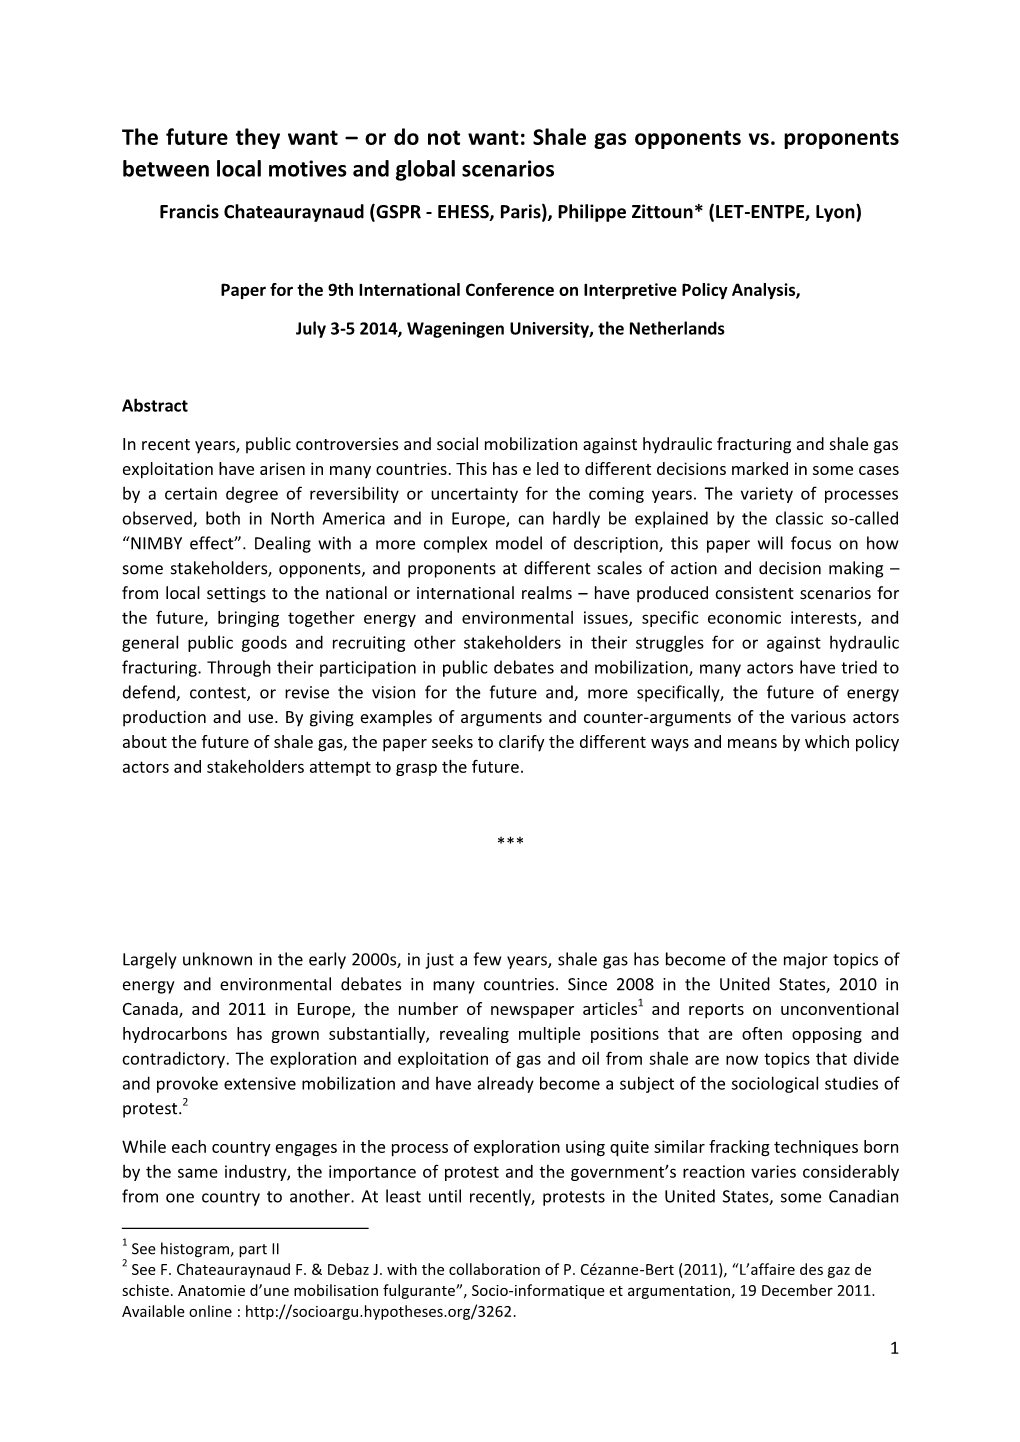 Shale Gas Opponents Vs. Proponents Between Local Motives and Global Scenarios Francis Chateauraynaud (GSPR - EHESS, Paris), Philippe Zittoun* (LET-ENTPE, Lyon)